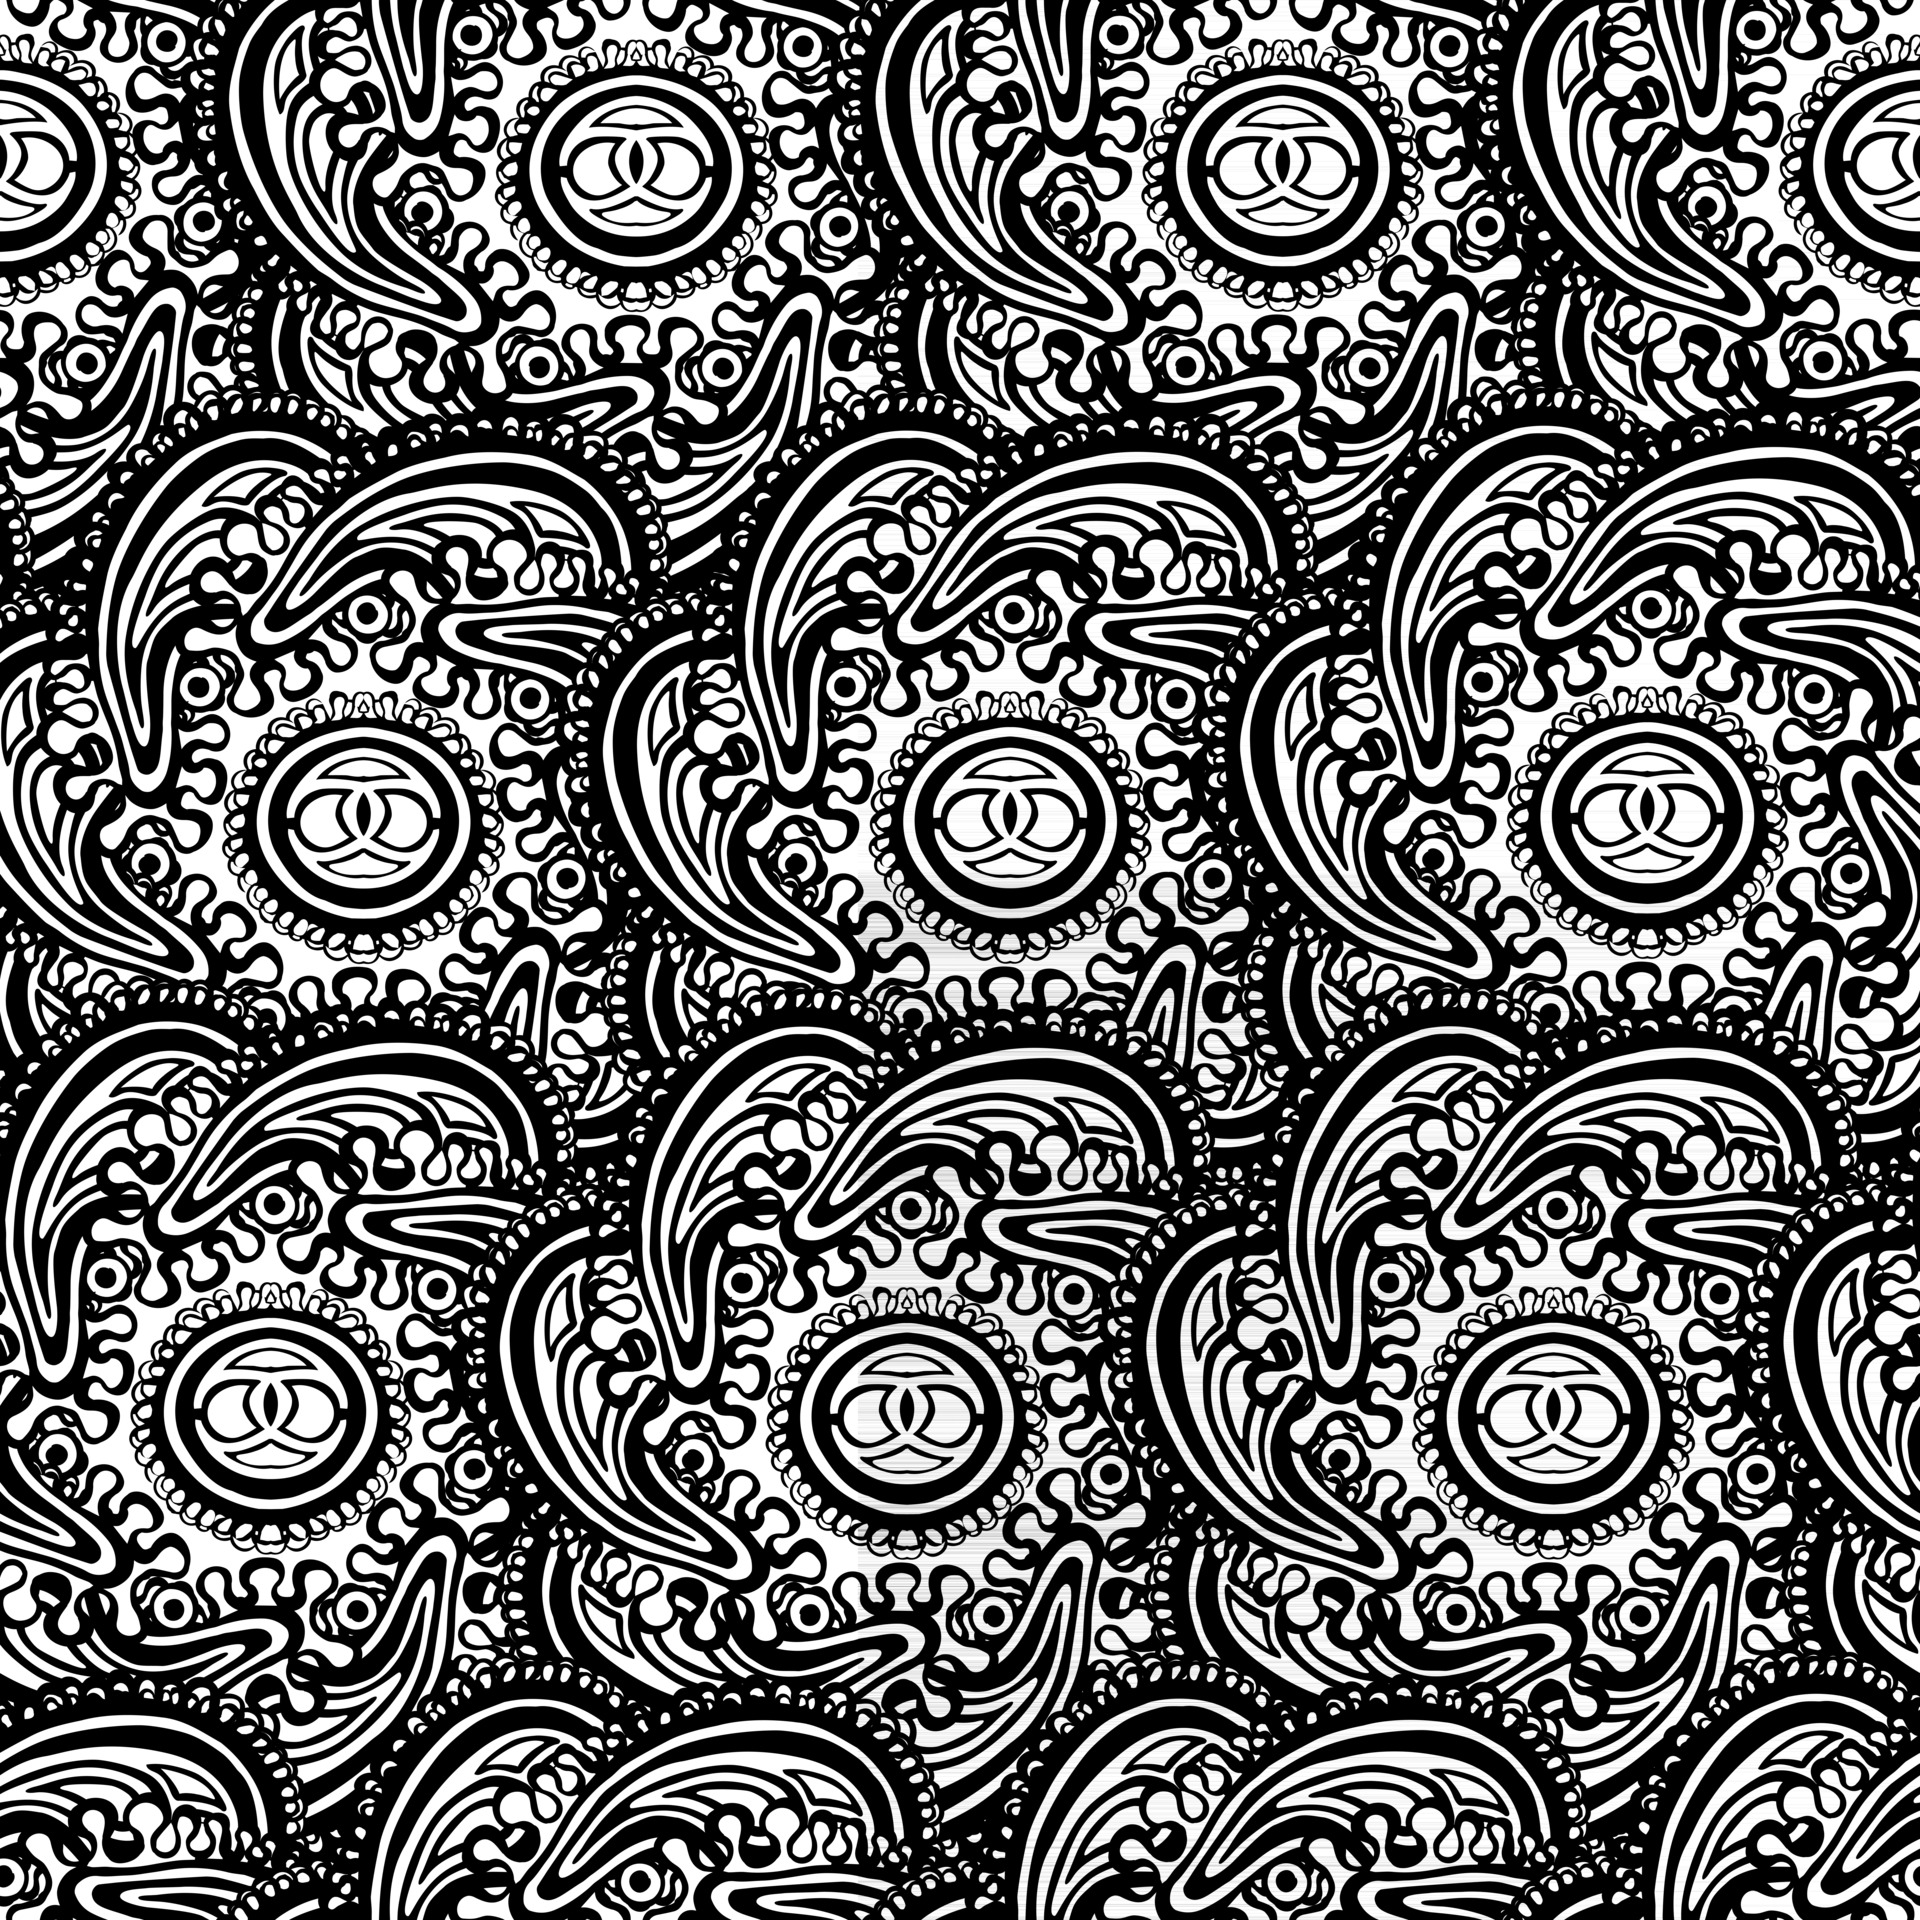 Classical luxury old fashioned damask ornament, royal victorian seamless texture for wallpaper, textile, wrapping. Coloring book for kids and adults. Vector damask seamless pattern element